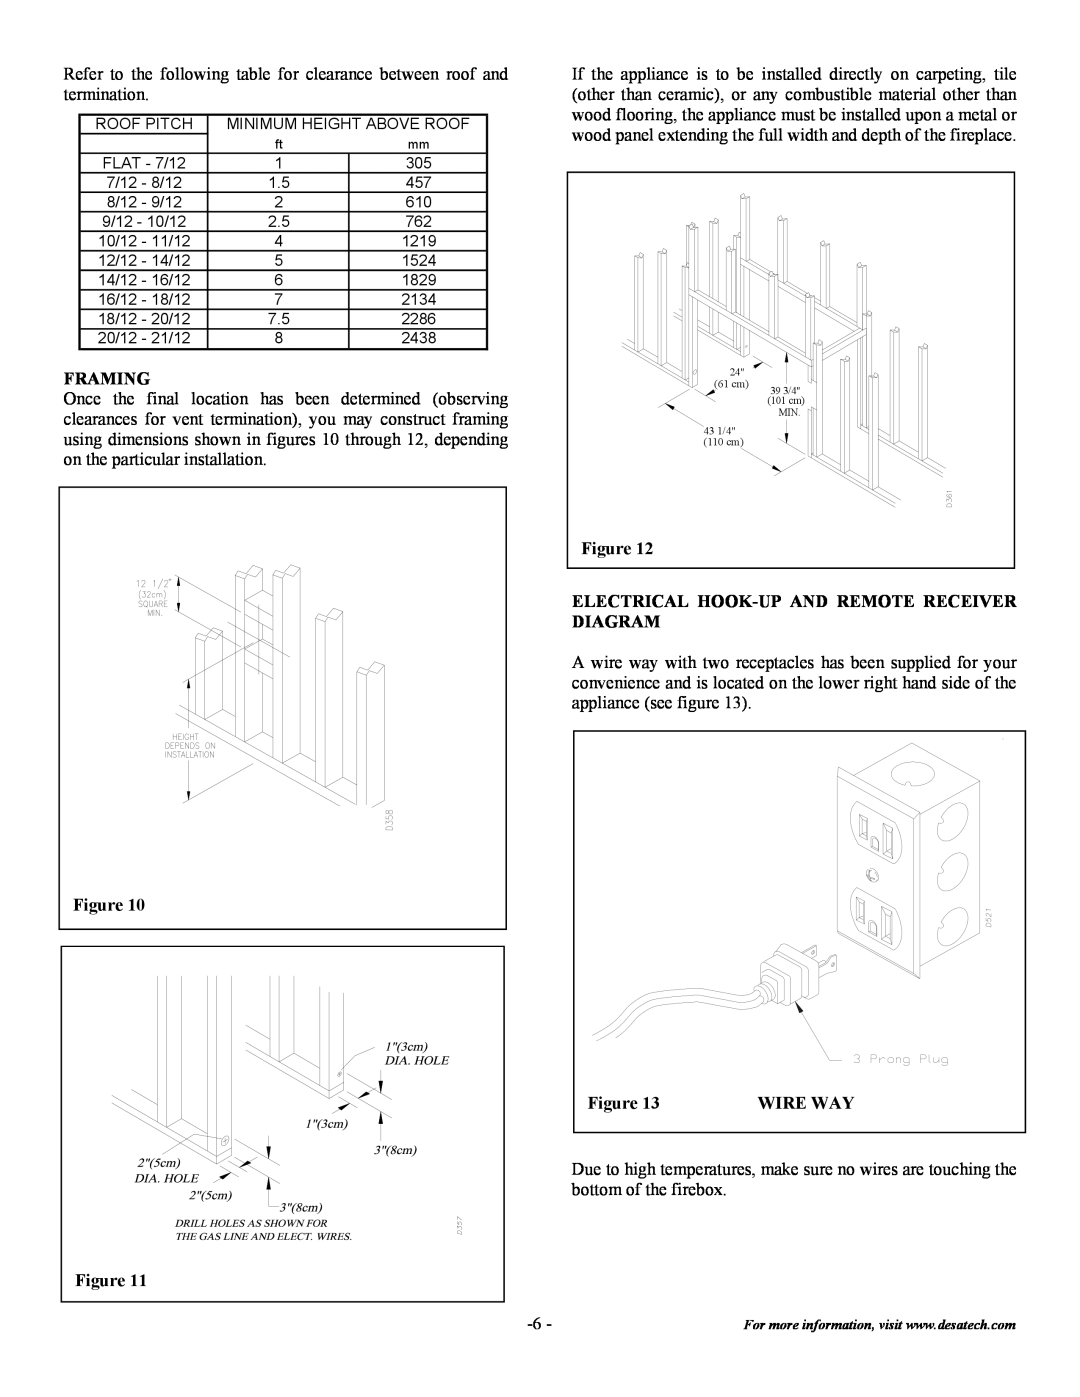 Desa DVF32TMHST installation instructions Framing, Electrical Hook-Upand Remote Receiver Diagram, Wire Way 